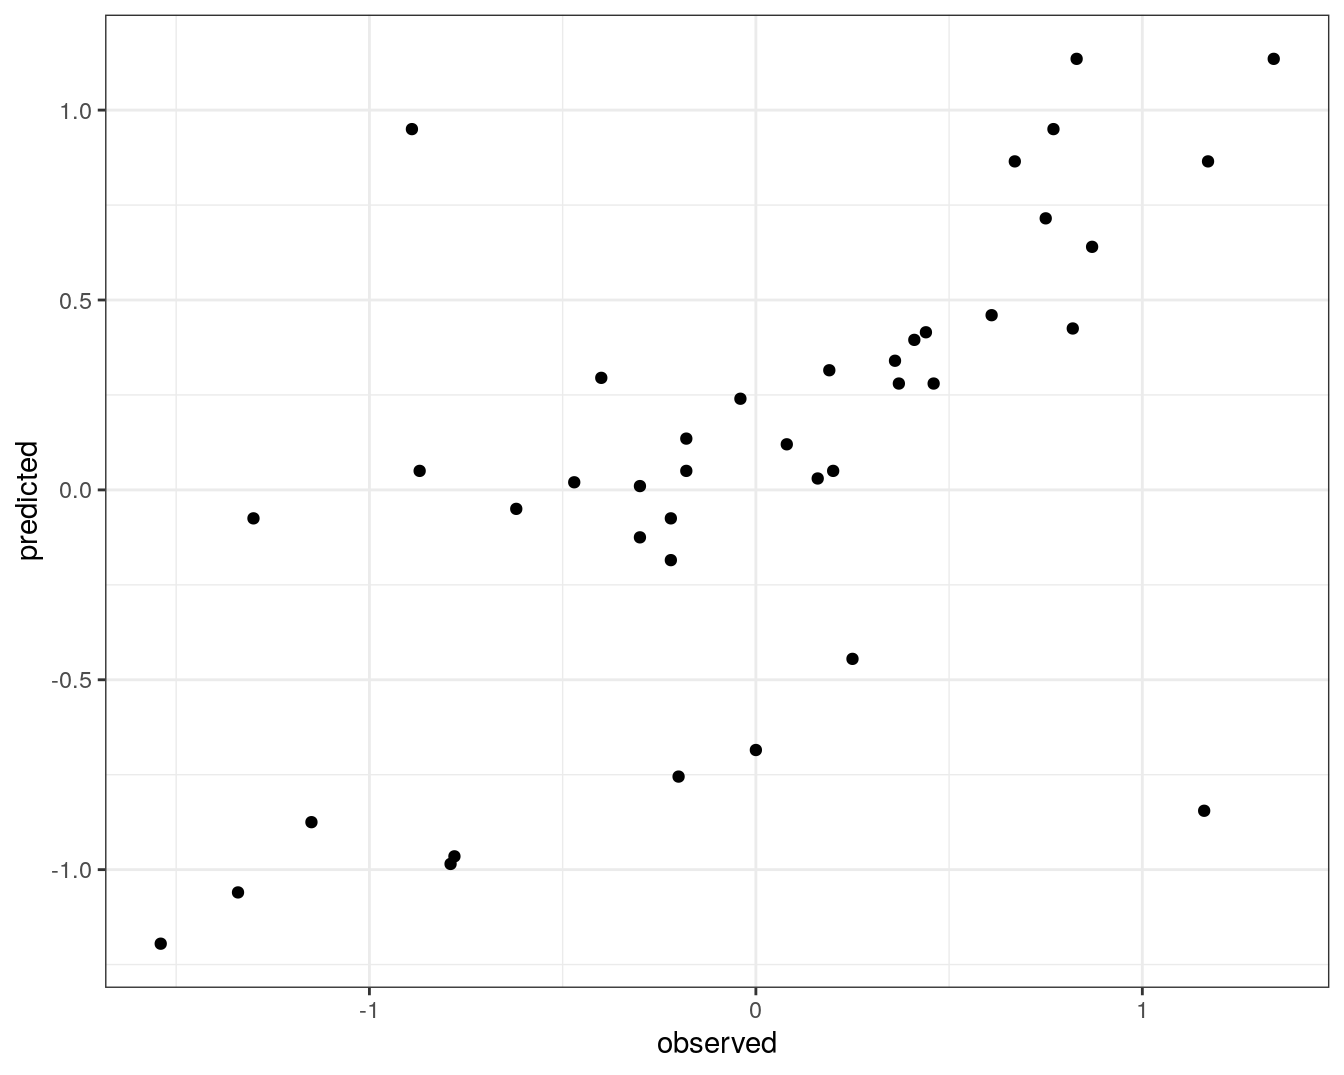 Concordance between observed concentration ratios and those predicted by _k_-nn regression.